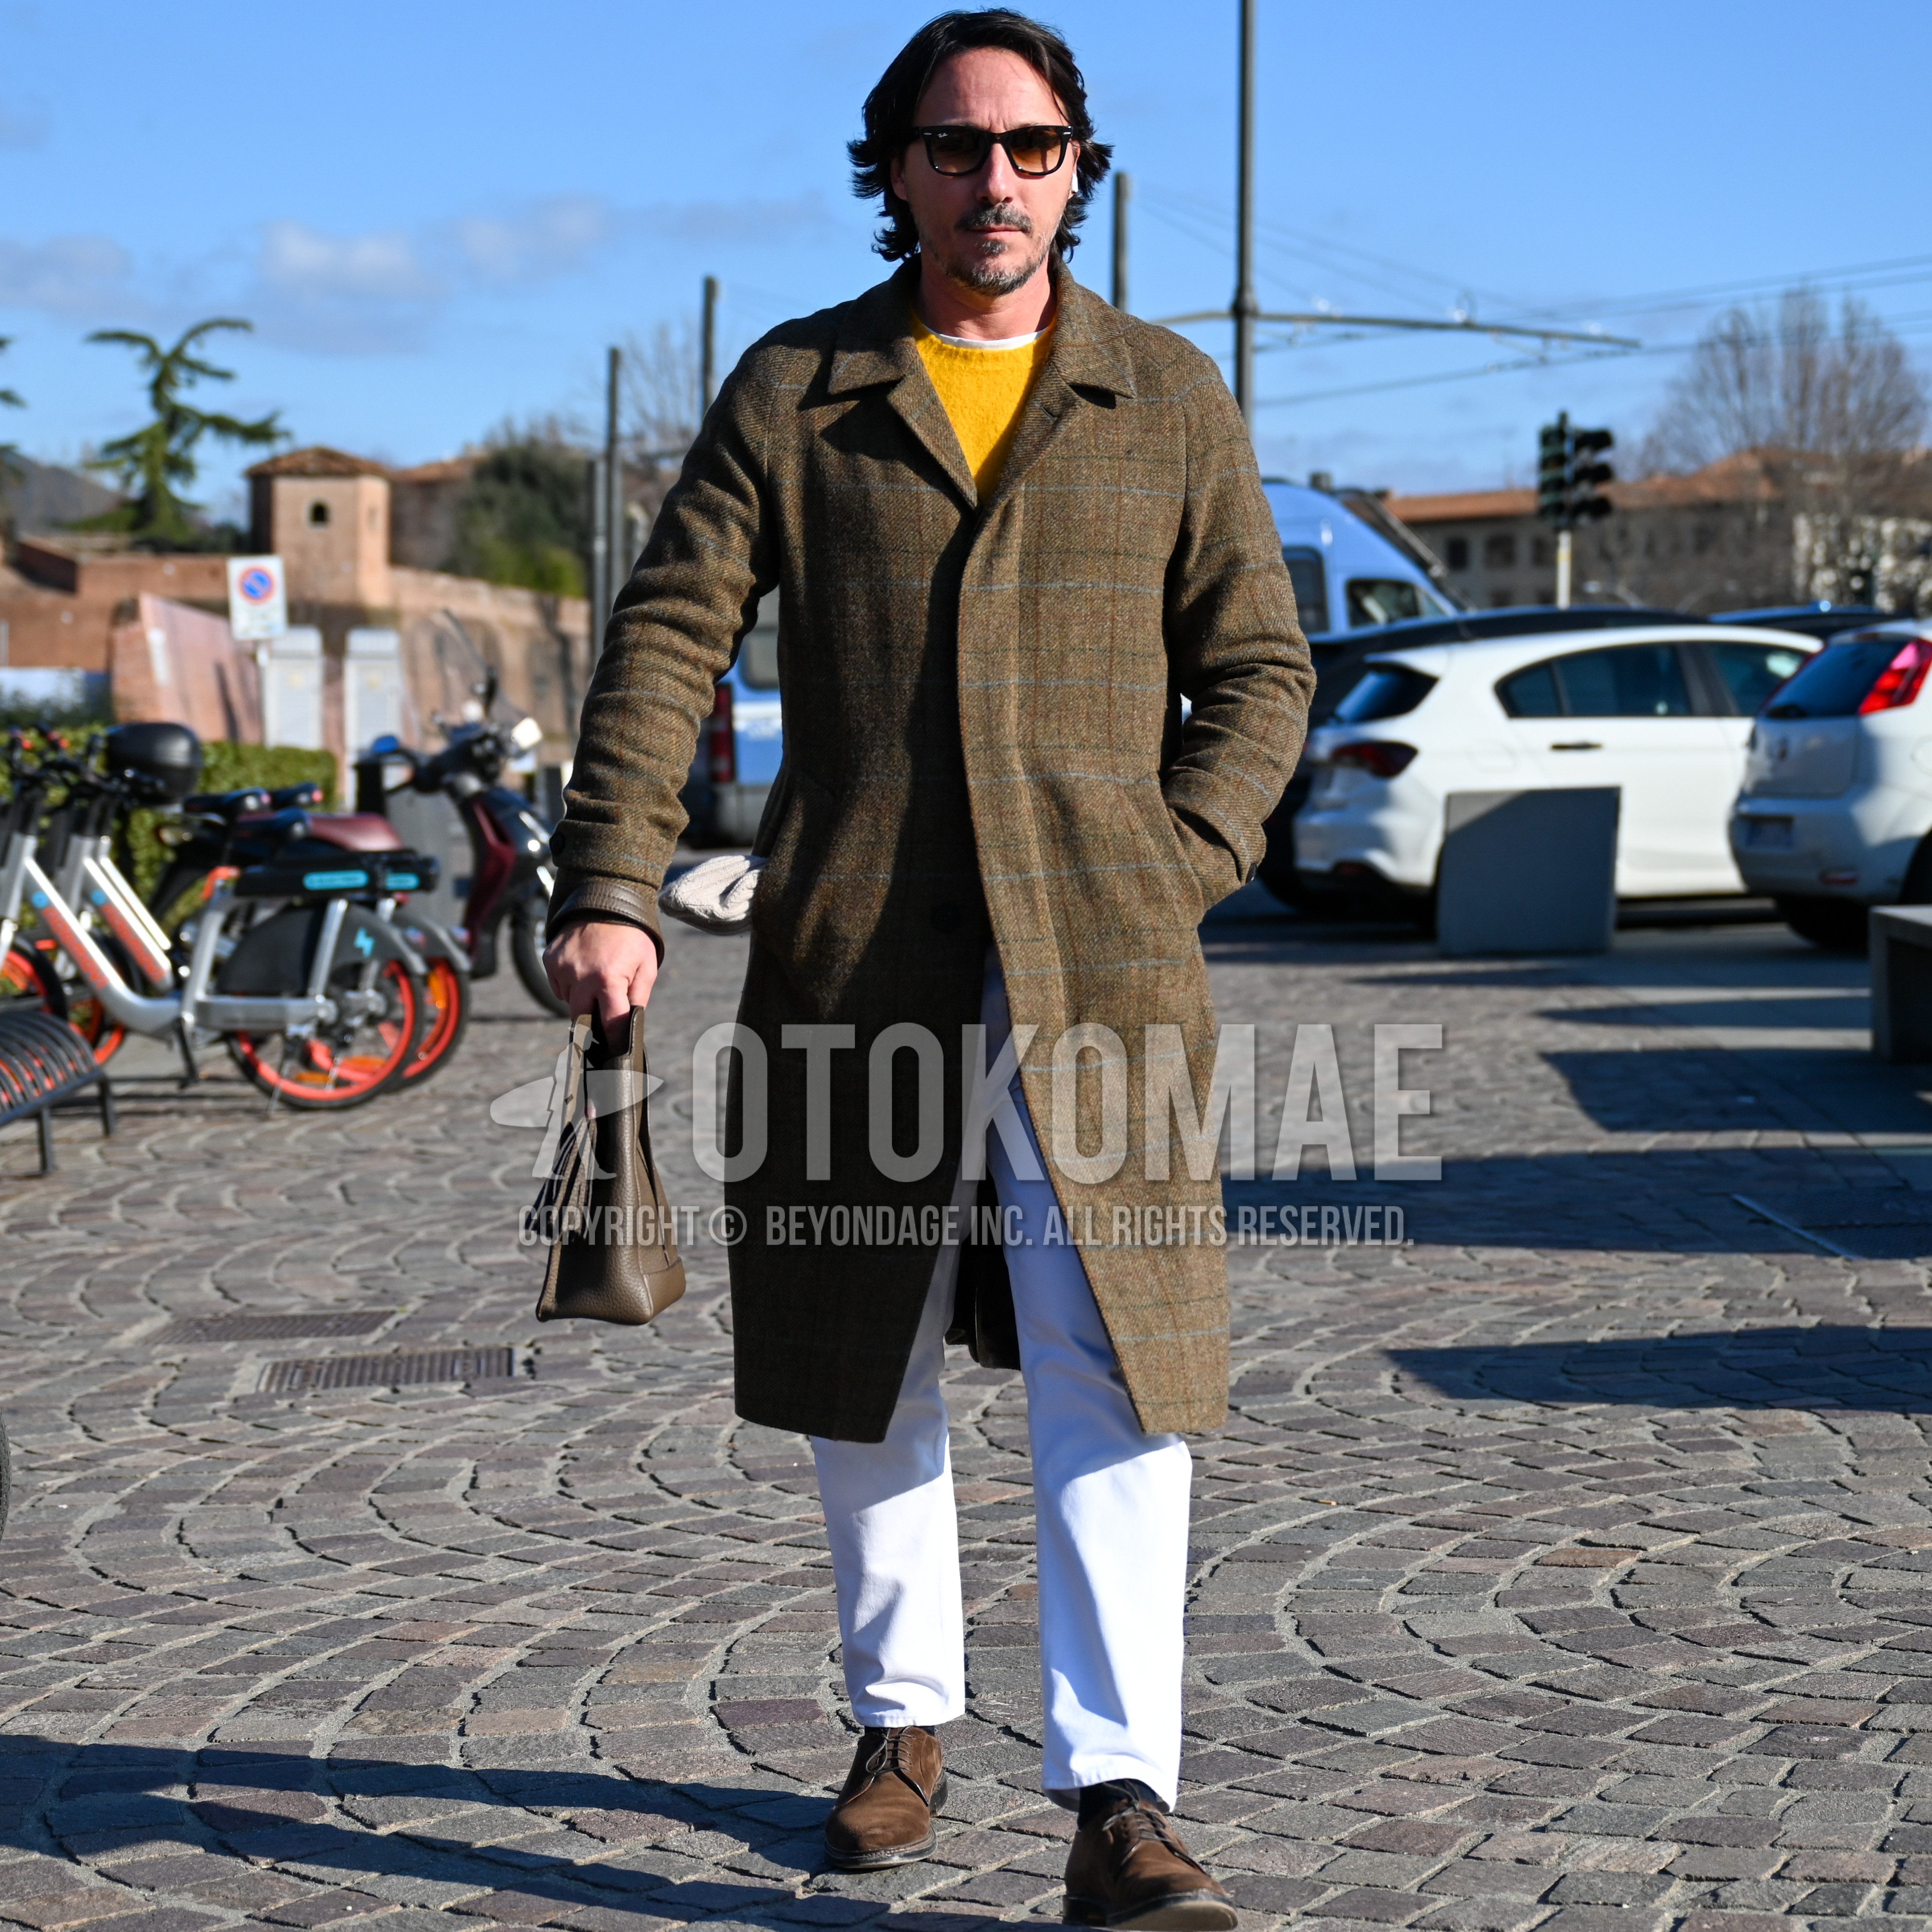 Men's autumn winter outfit with black plain sunglasses, olive green check chester coat, white plain long sleeve t-shirt, yellow plain sweater, white plain chinos, black plain socks, brown suede shoes leather shoes, olive green plain briefcase/handbag.